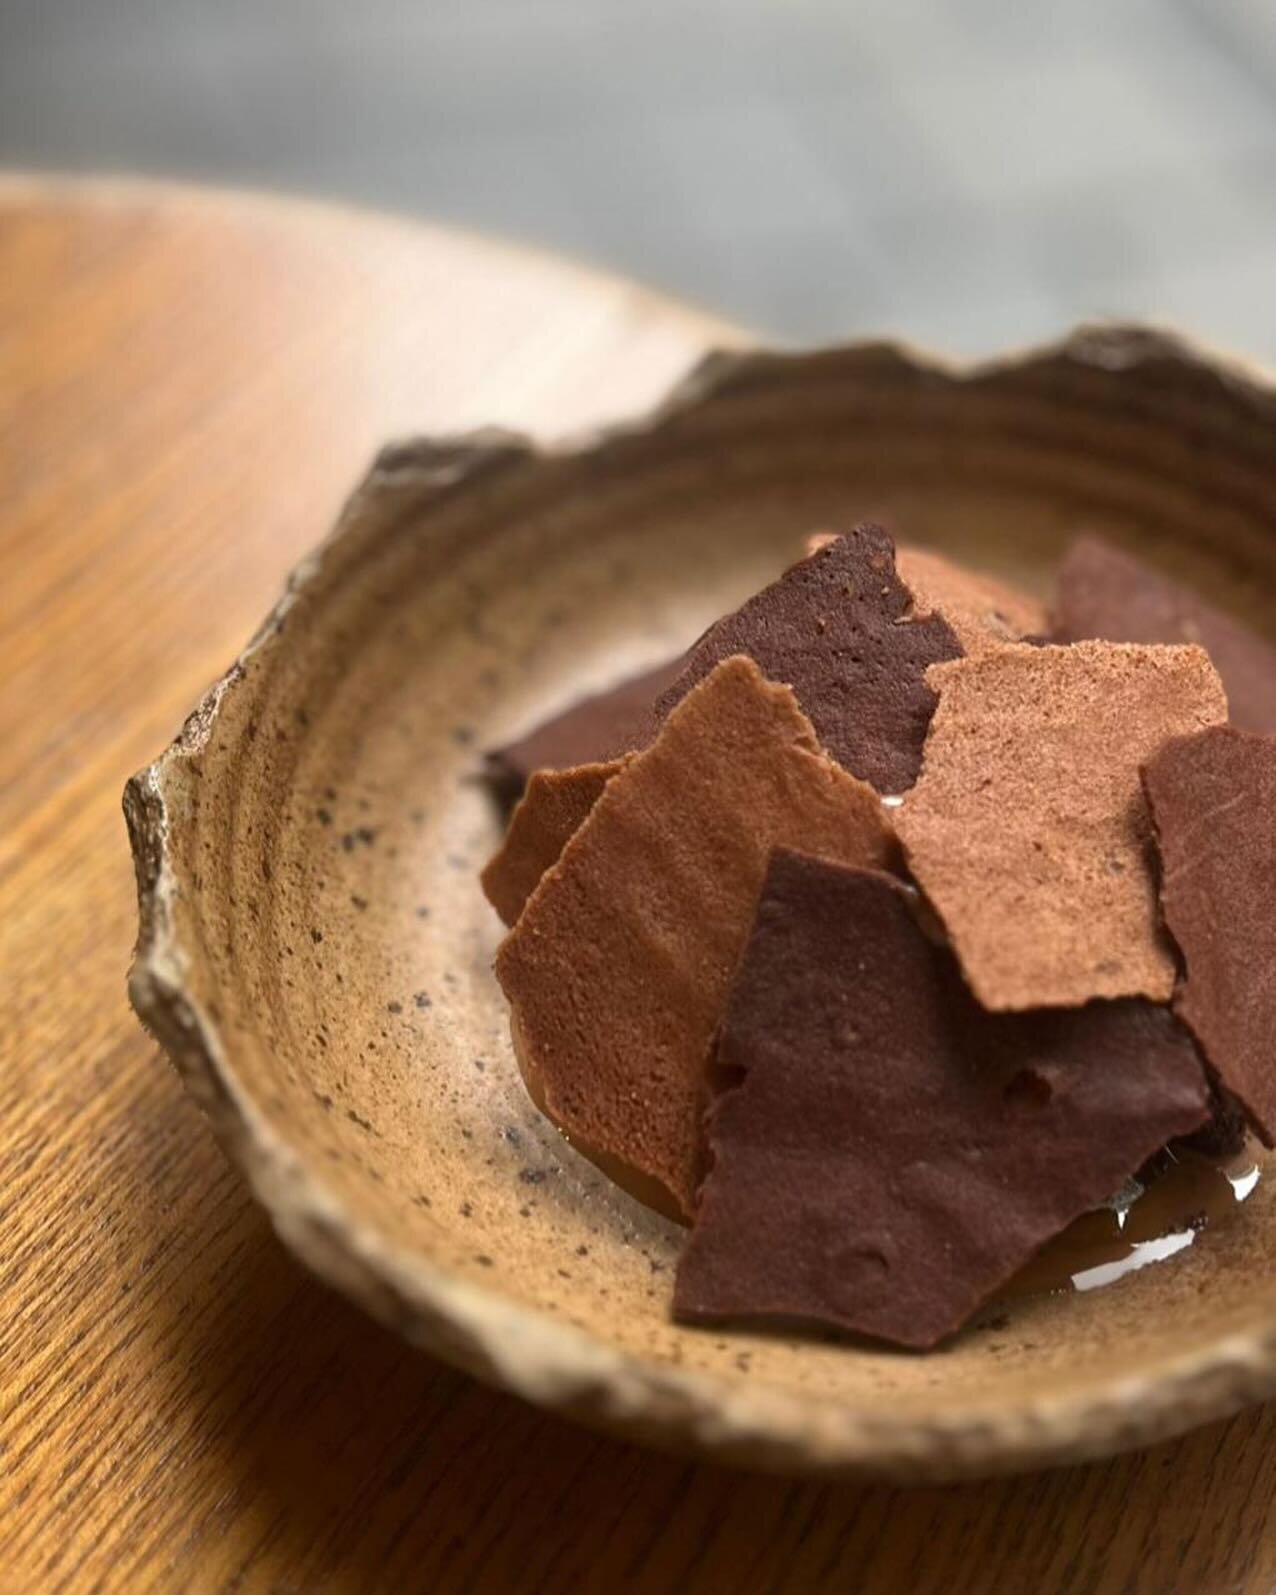 We&rsquo;re bringing back the flavours of a Spanish childhood with our latest dessert creation: Chocolate, Salt, and Olive Oil. It&rsquo;s a throwback to those days when your mom used to hook you up with a chocolate sandwich, made with crispy bread, 